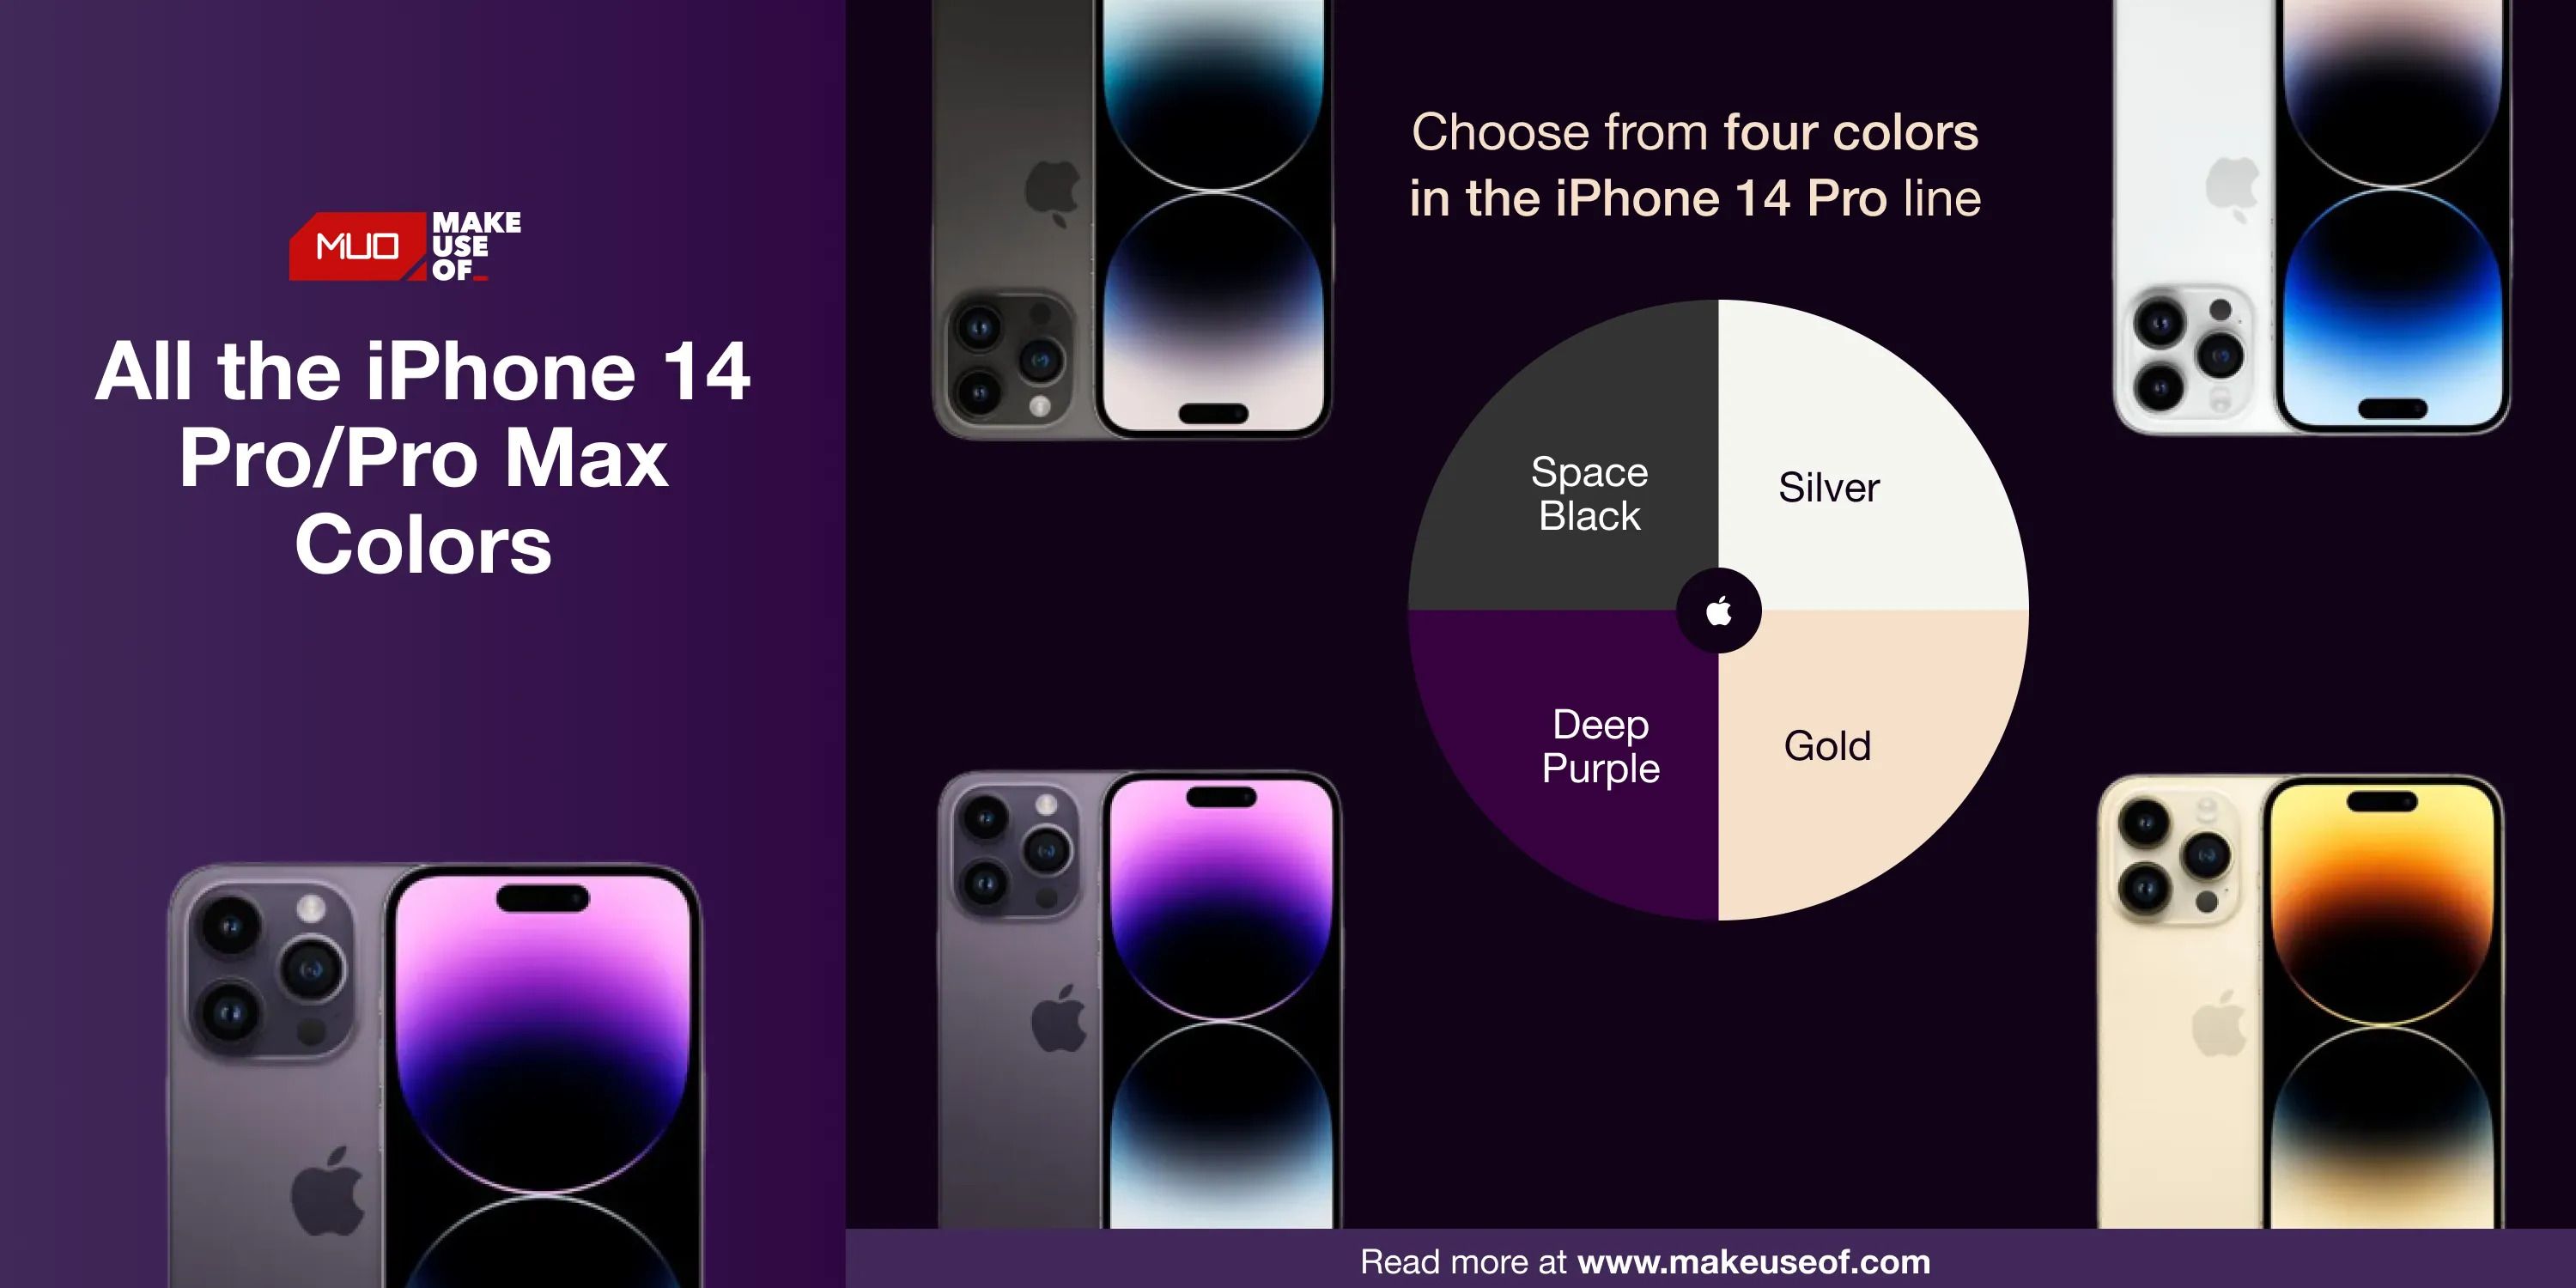 Is Apple's new iPhone 14 Pro actually 'deep purple' or another color?